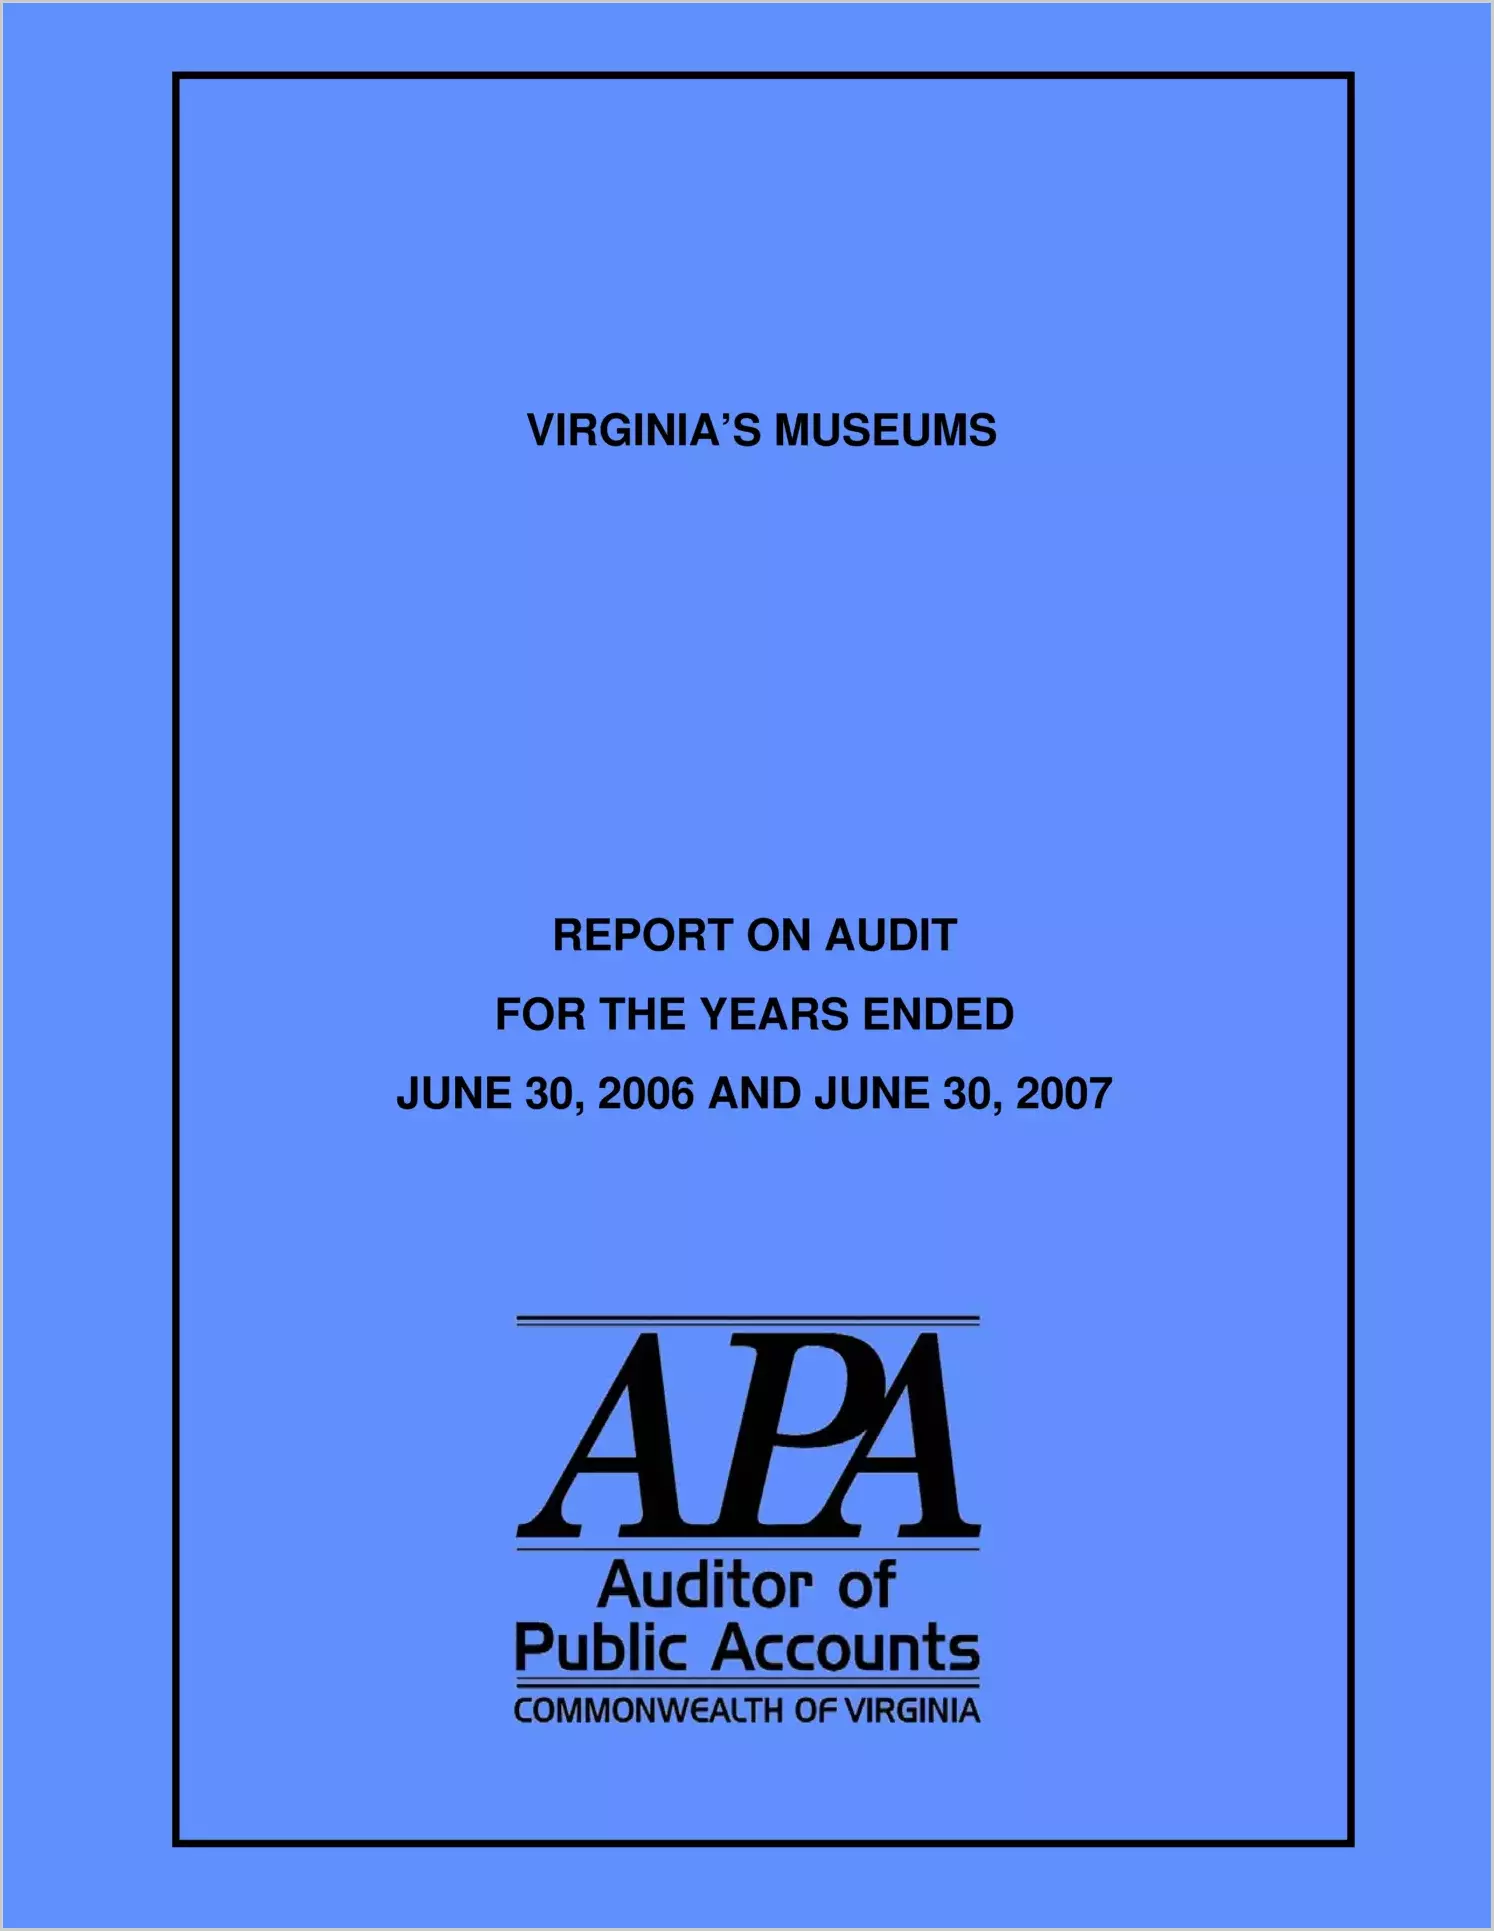 Virginia's Museums report on audit for the years ended June 30, 2006 and June 30, 2007